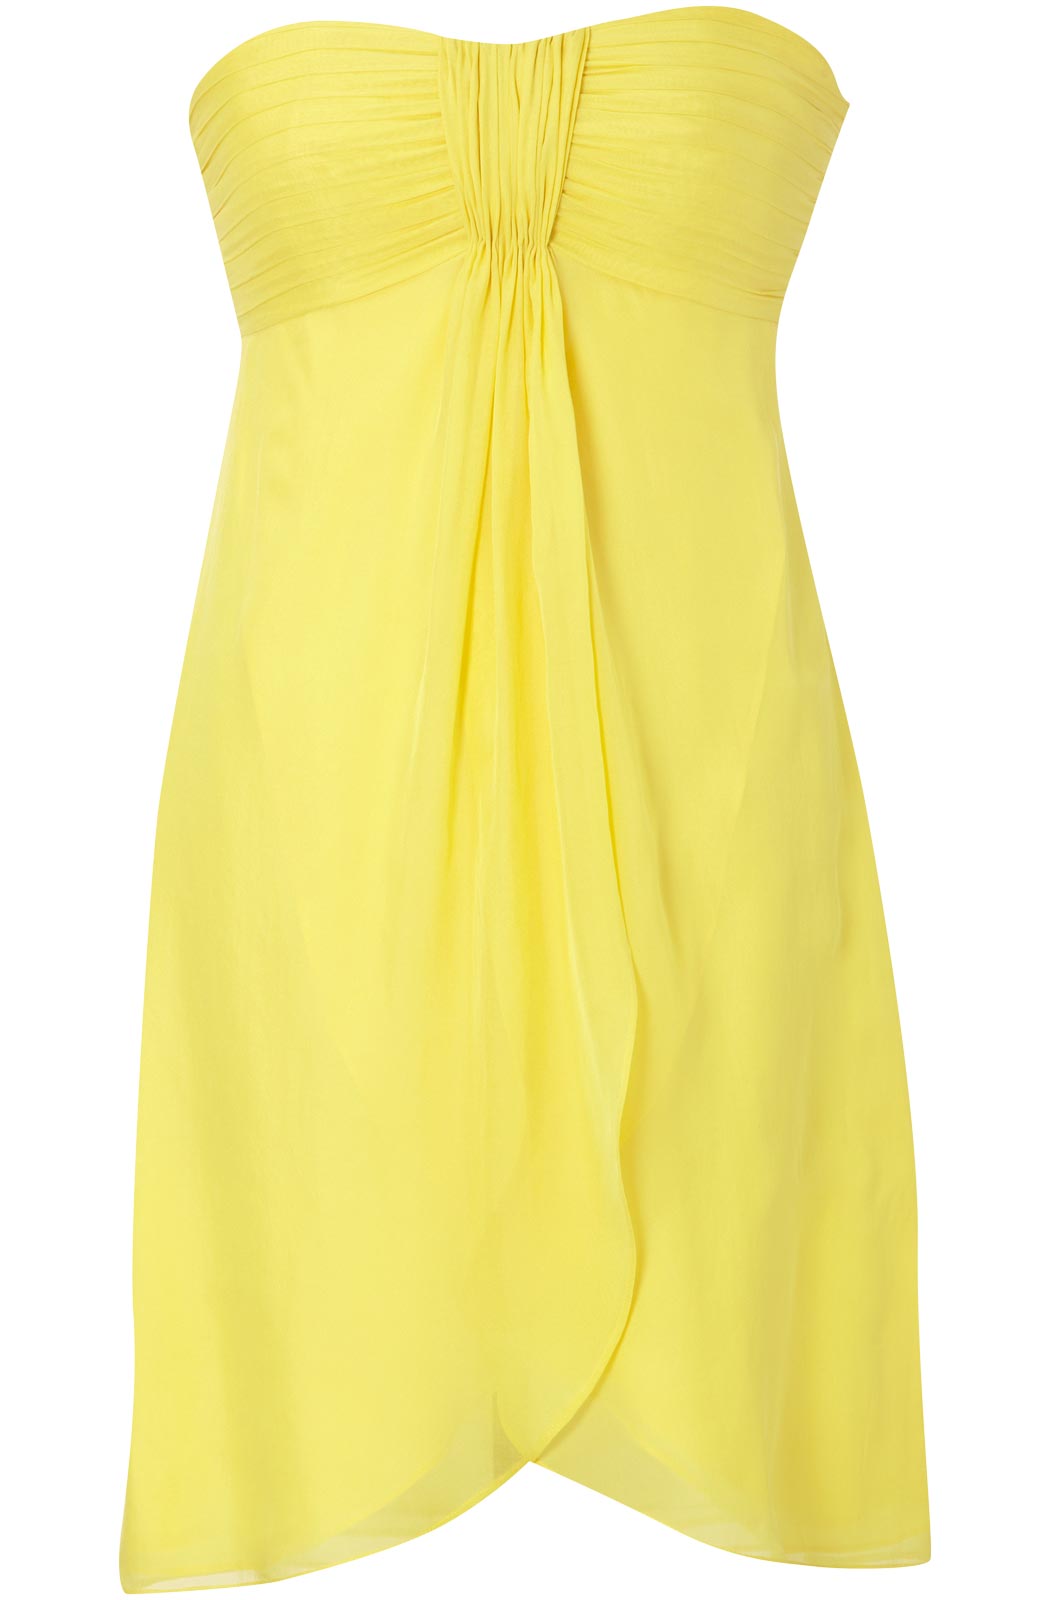 Yellow Dress Summer : How To Get Attention